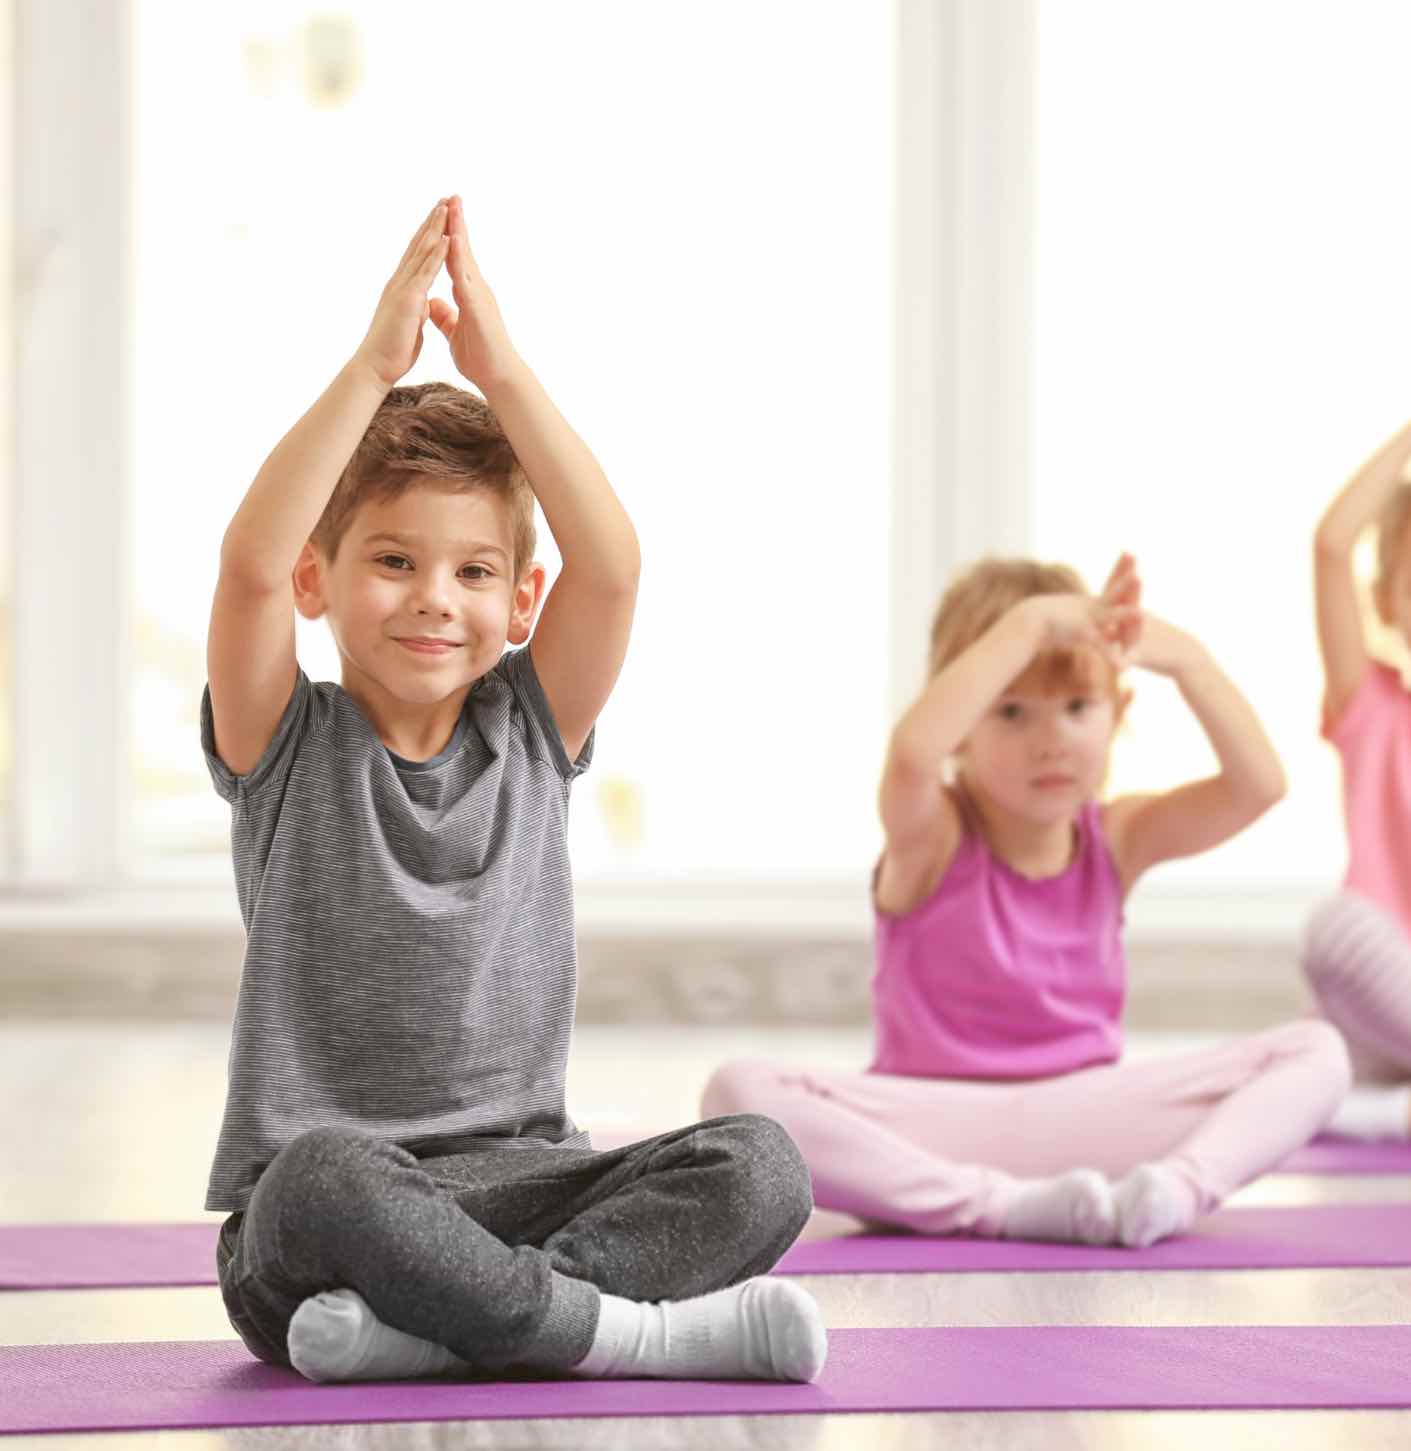 These kids enjoy practicing mindfulness through yoga - learn more tips with Romp n' Roll Pittsburgh East!